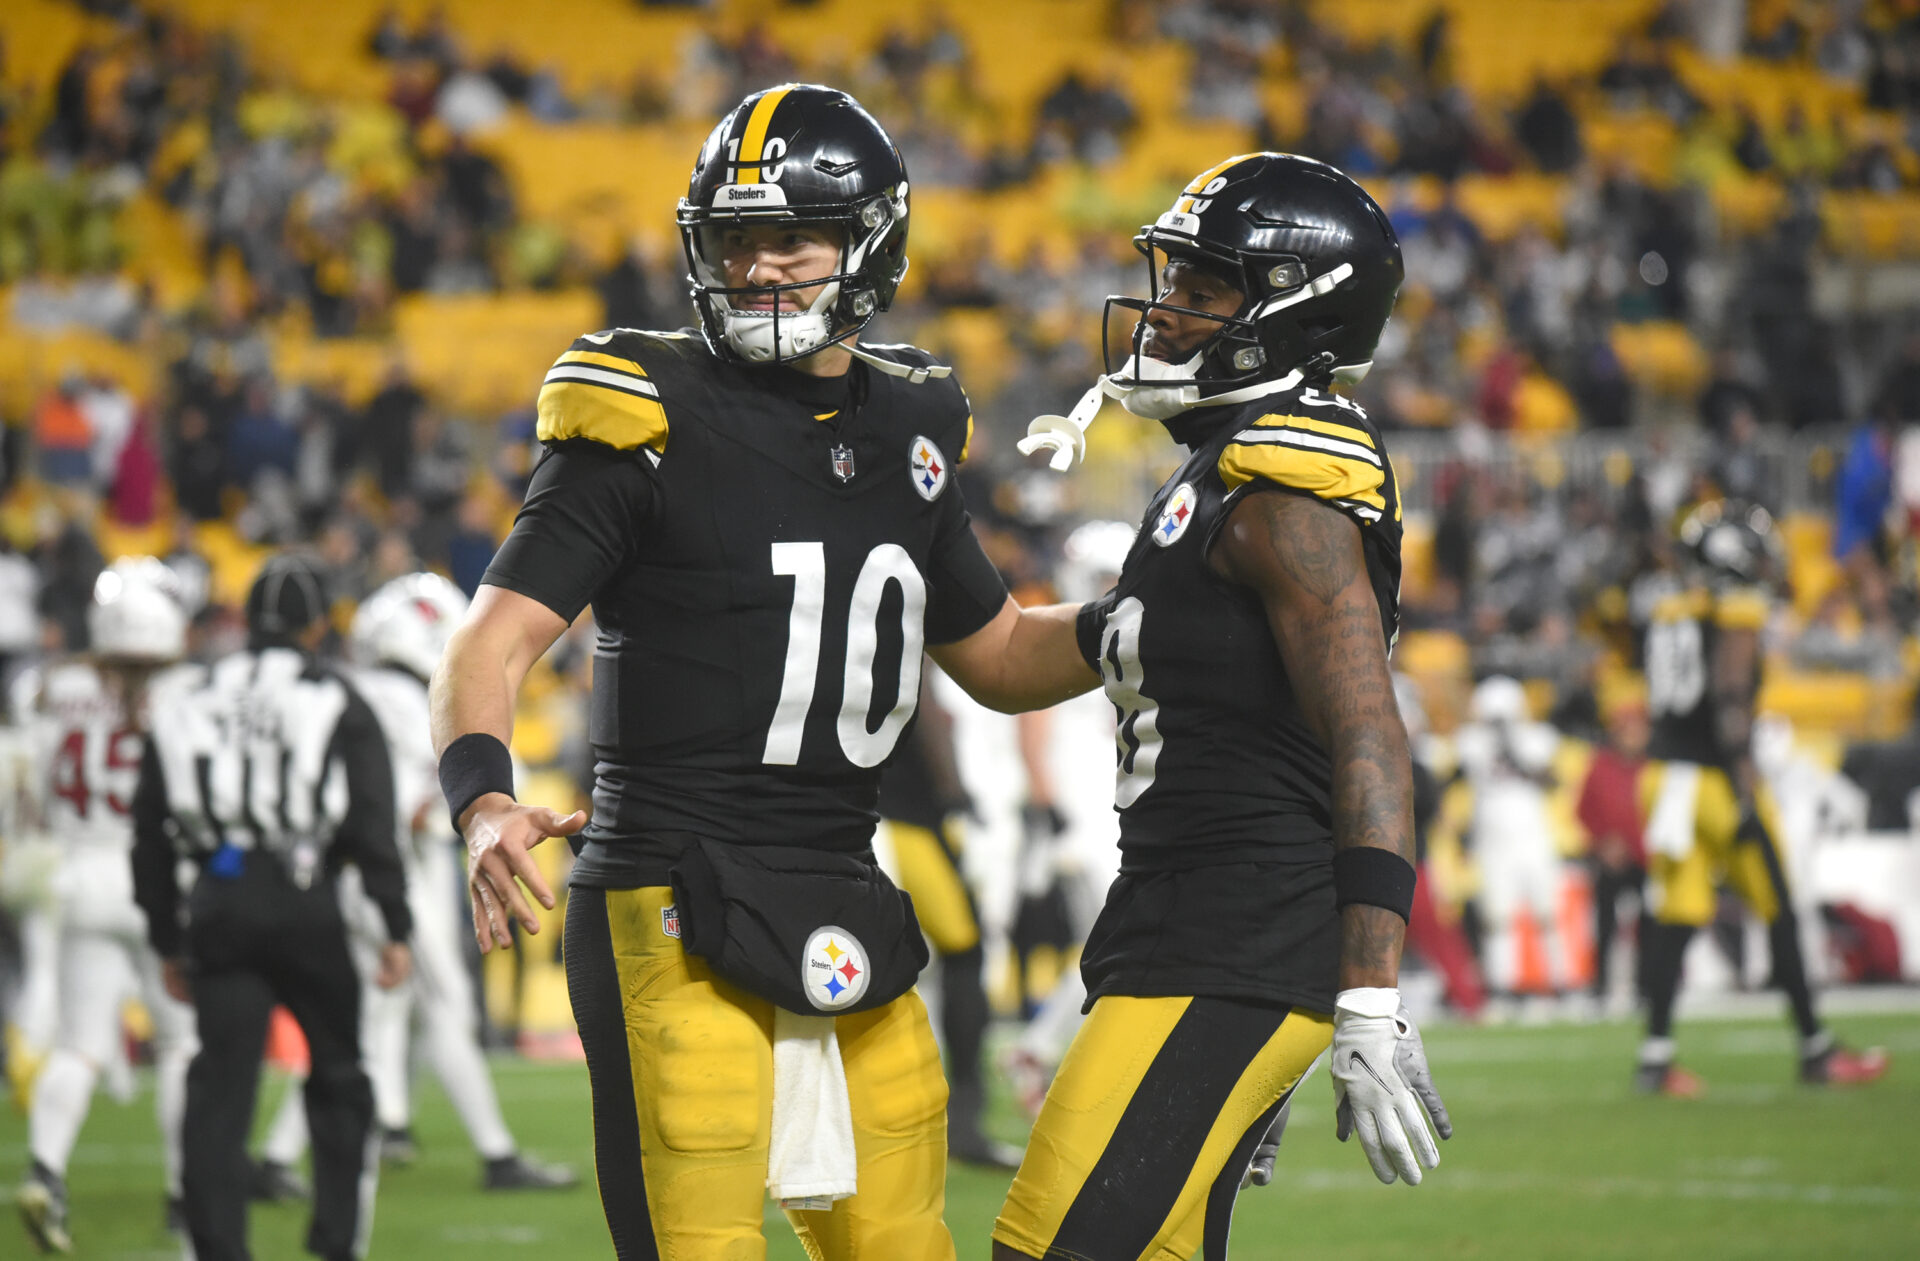 Pittsburgh Steelers quarterback Mitch Trubisky (10) celebrates a touchdown with wide receiver Diontae Johnson (18) as they play the Arizona Cardinals during the fourth quarter at Acrisure Stadium.